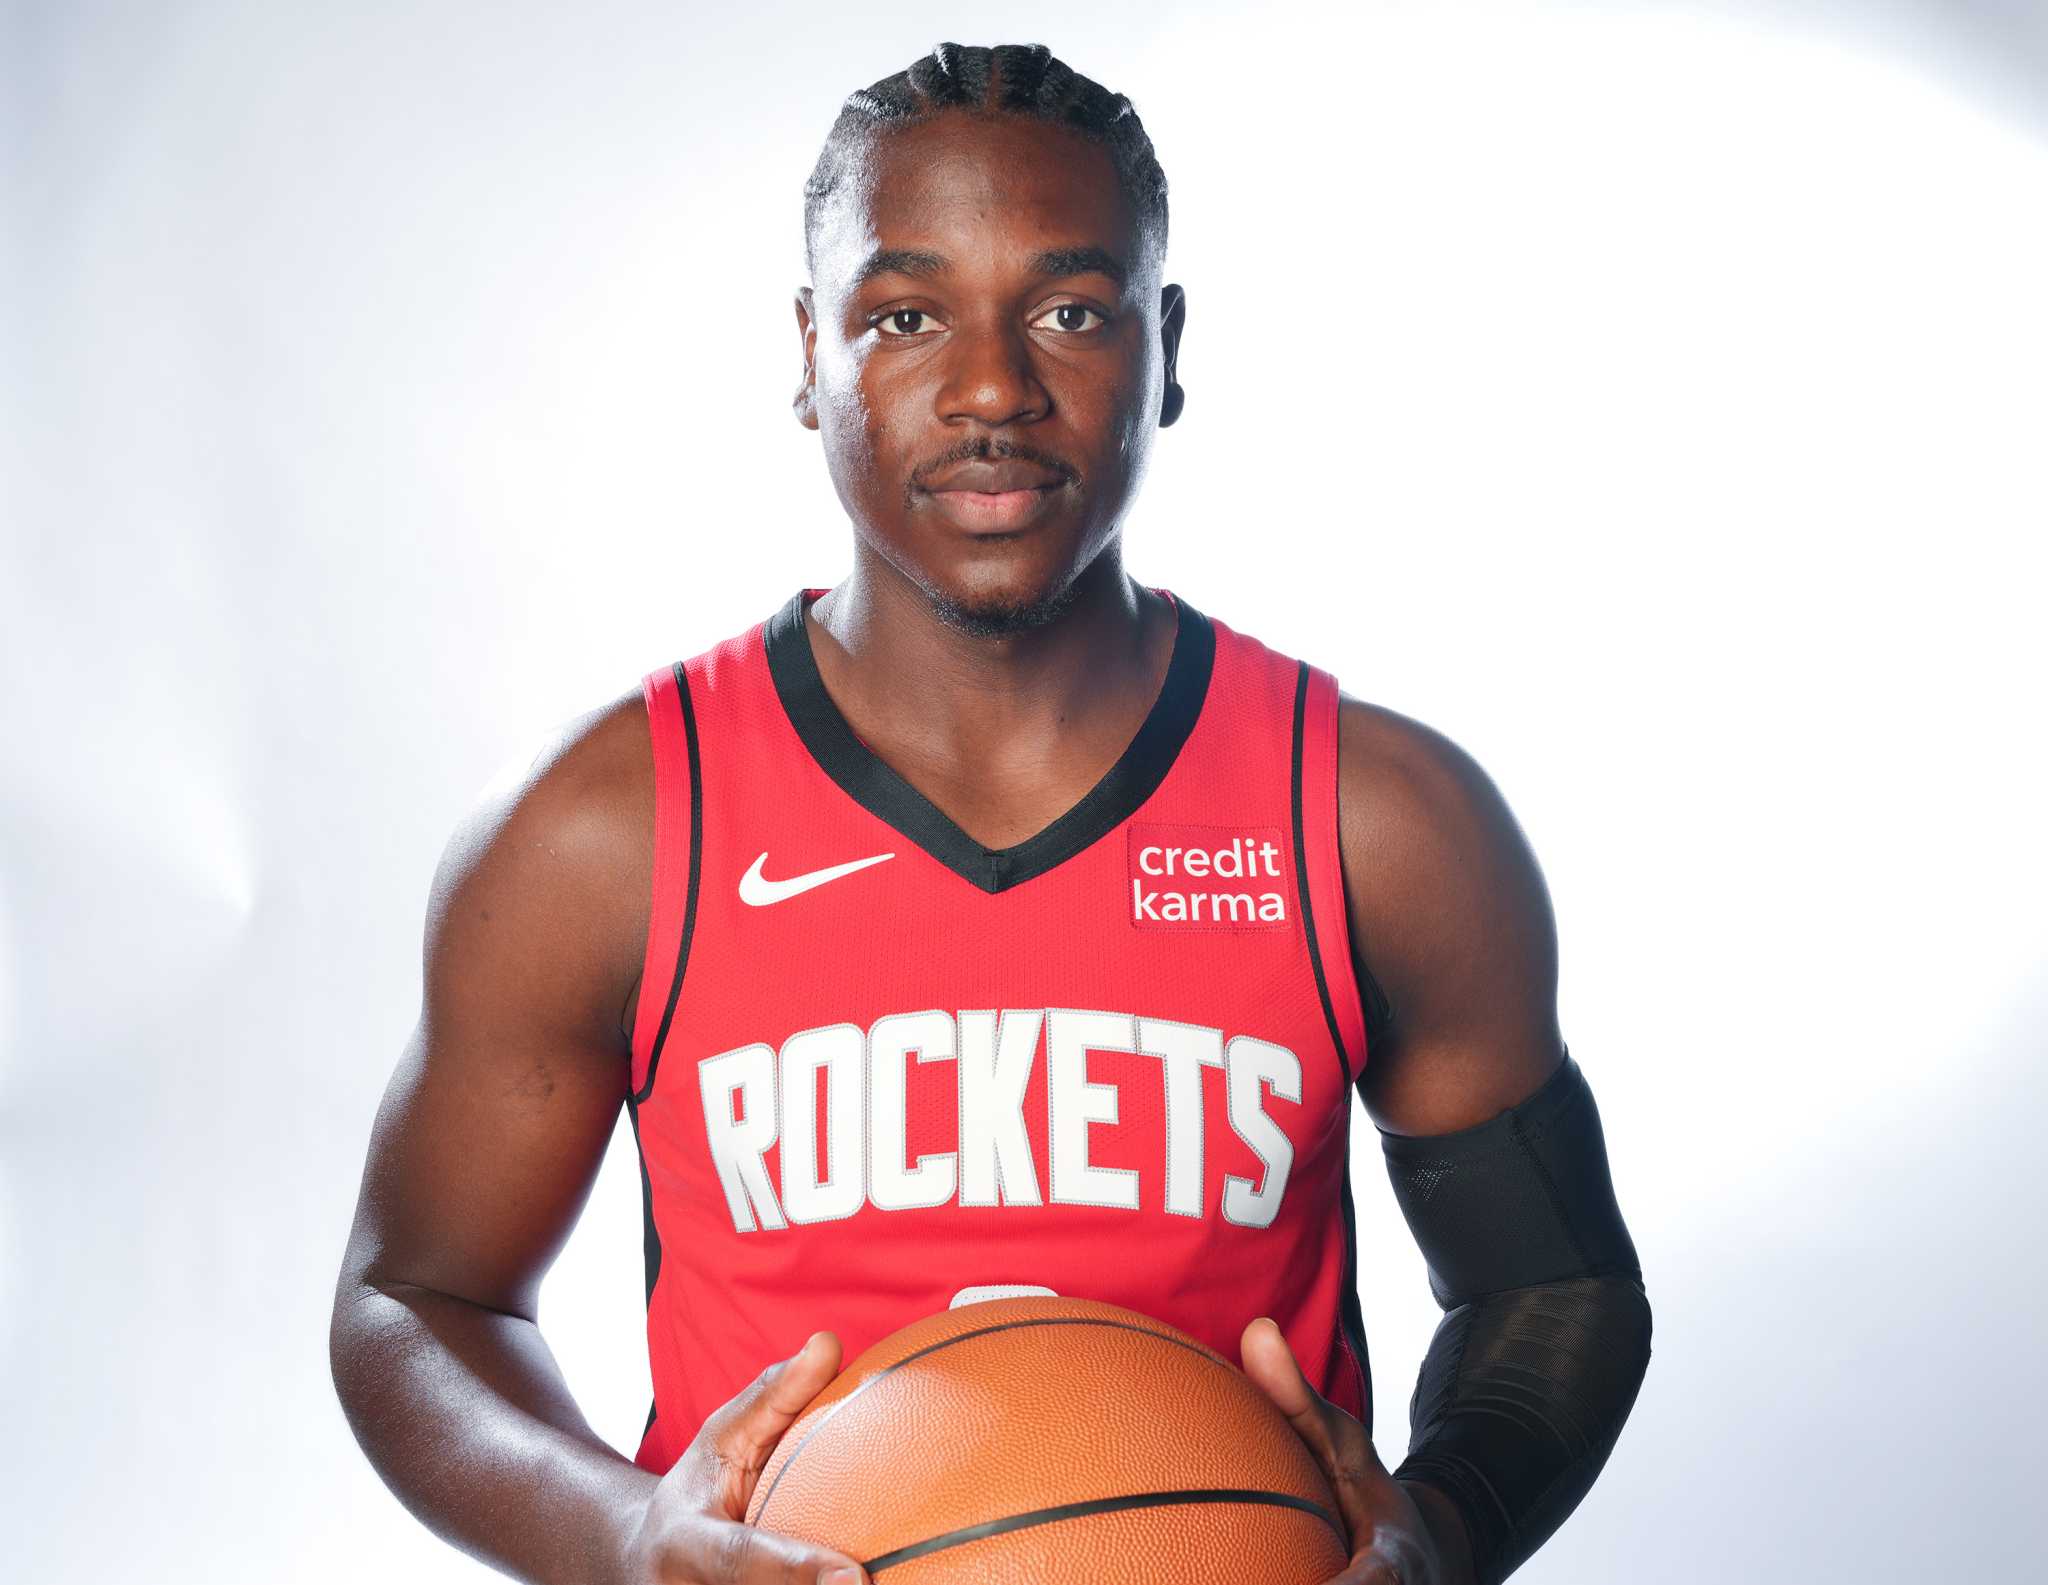 NBA updates - The Houston Rockets have unveiled new